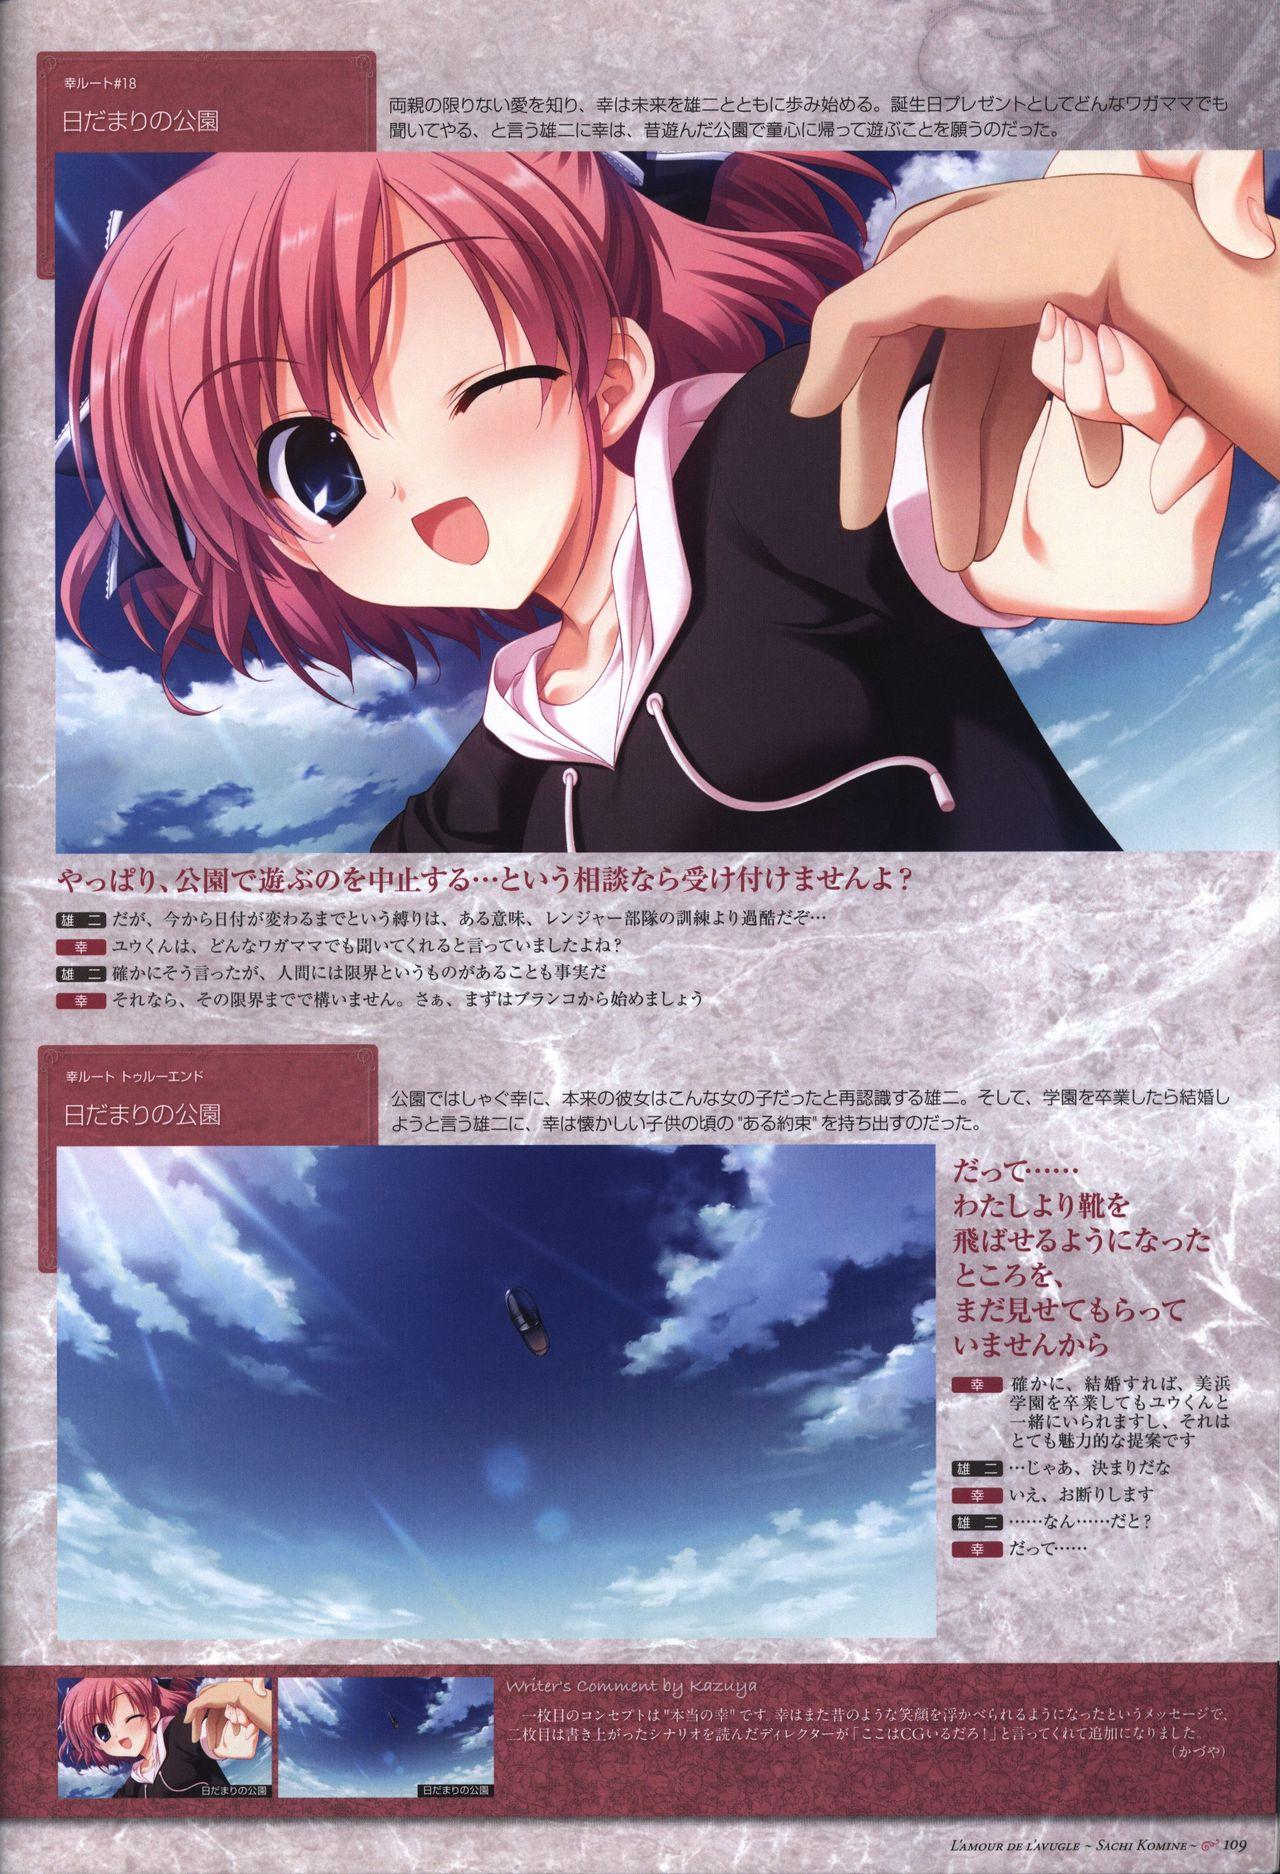 The Fruit of Grisaia Visual FanBook 109